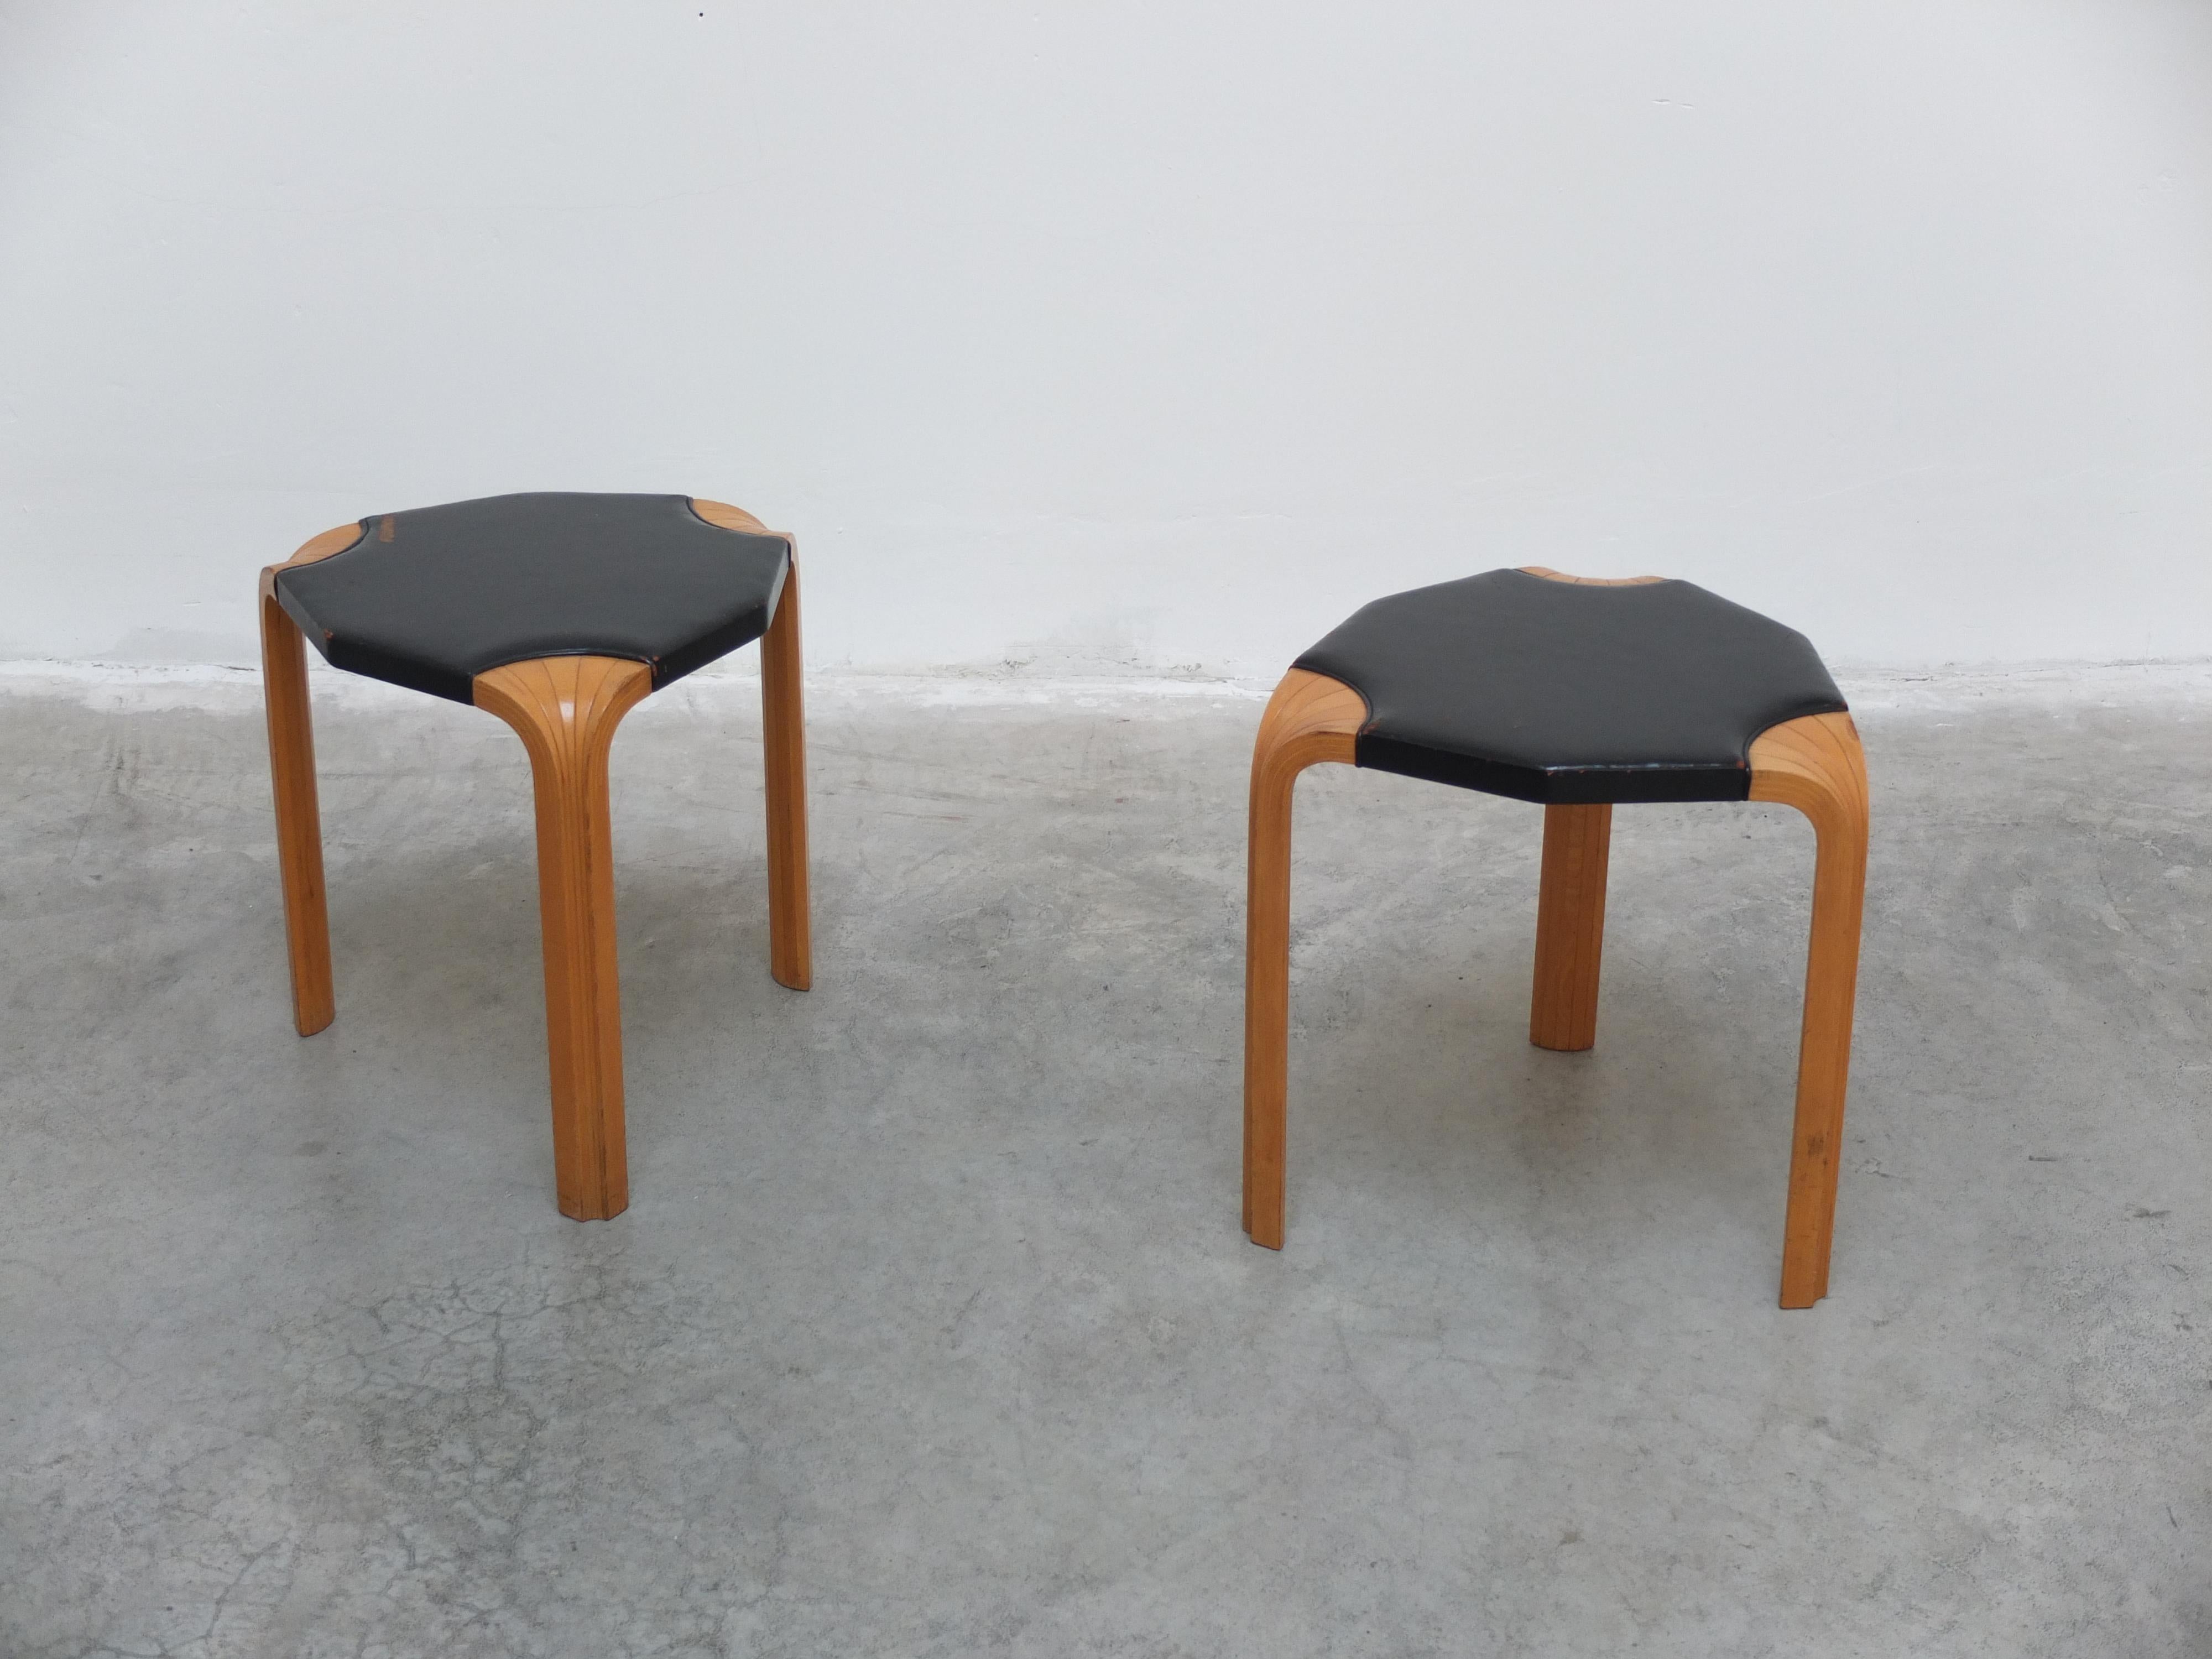 Very rare pair of model ‘X602’ stools designed by Alvar Aalto around 1954. Made of a birch tripod base with exceptional wood detailing and the original black leather seats. In great original condition with unique patina. Manufactured in Finland by